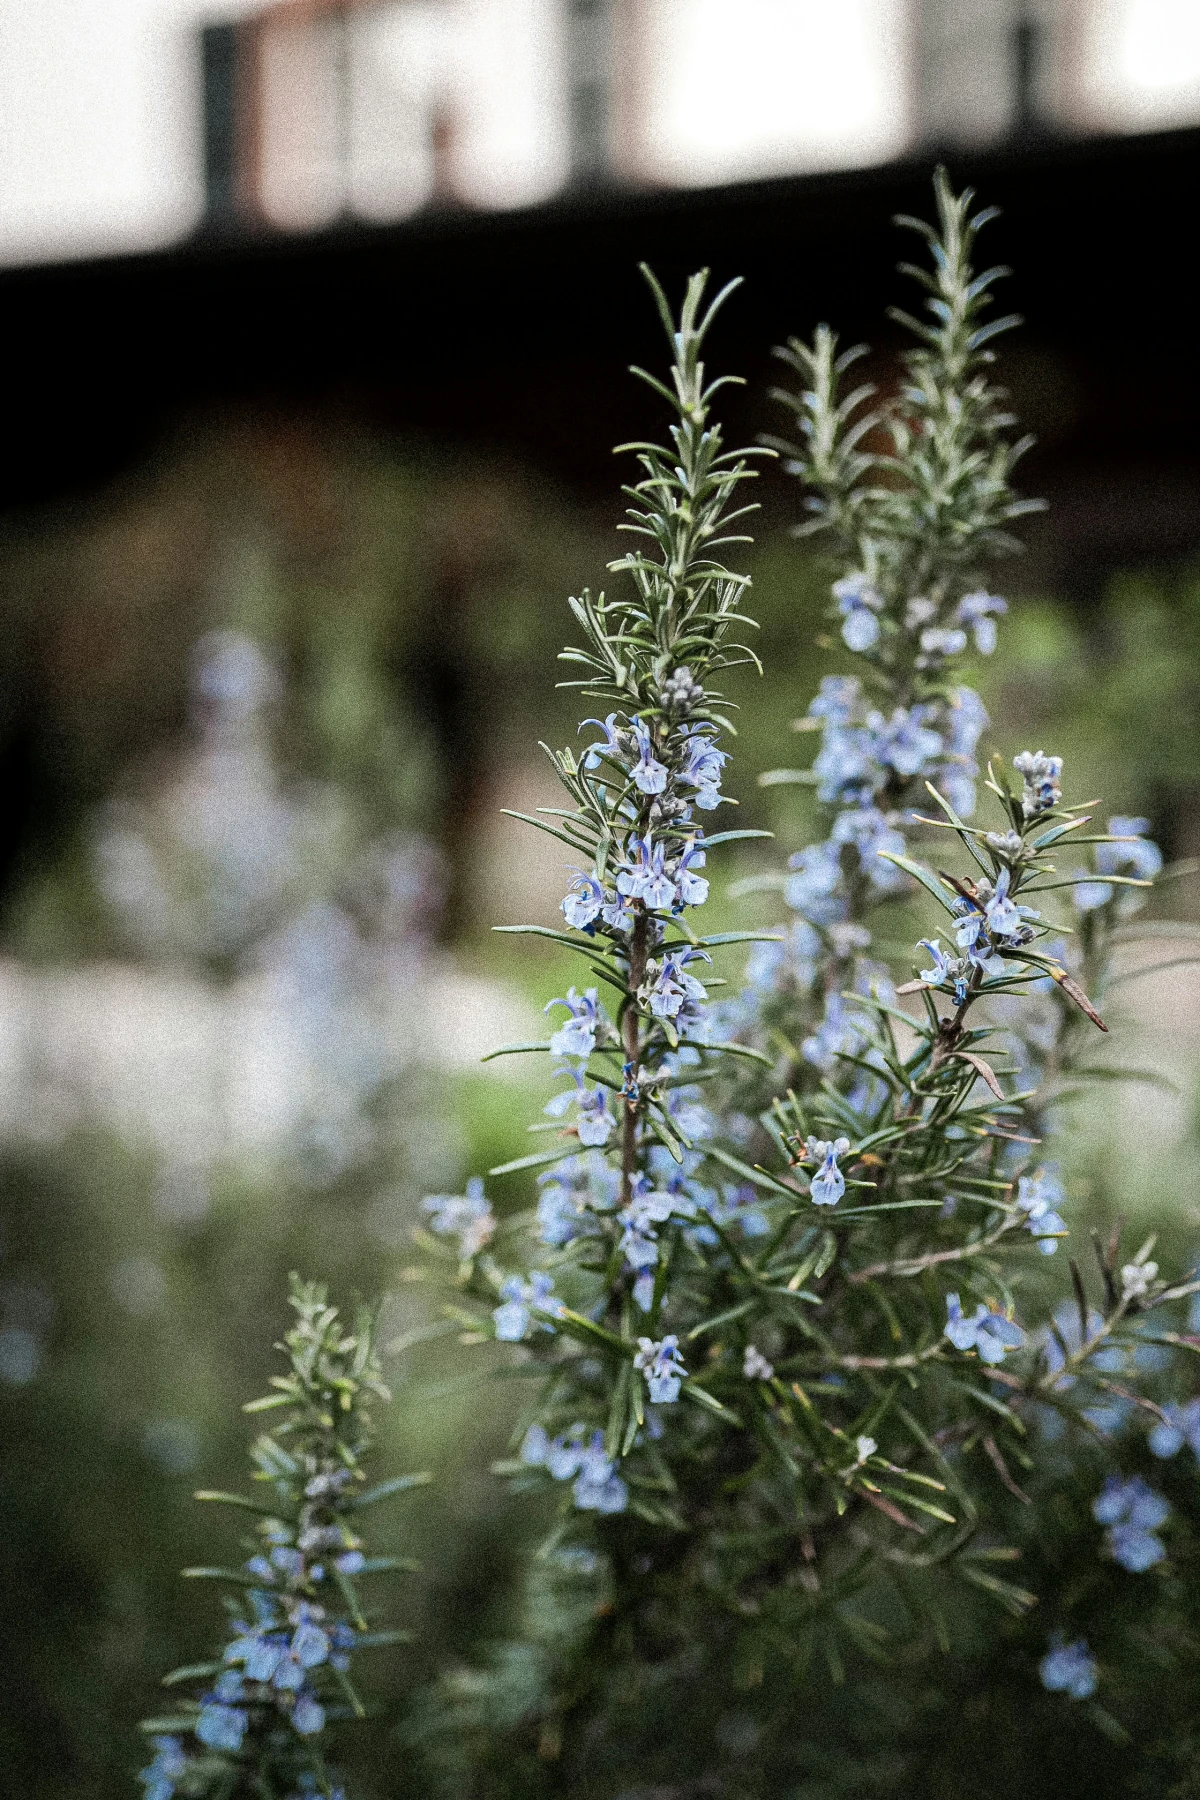 rosemary with purple flowers